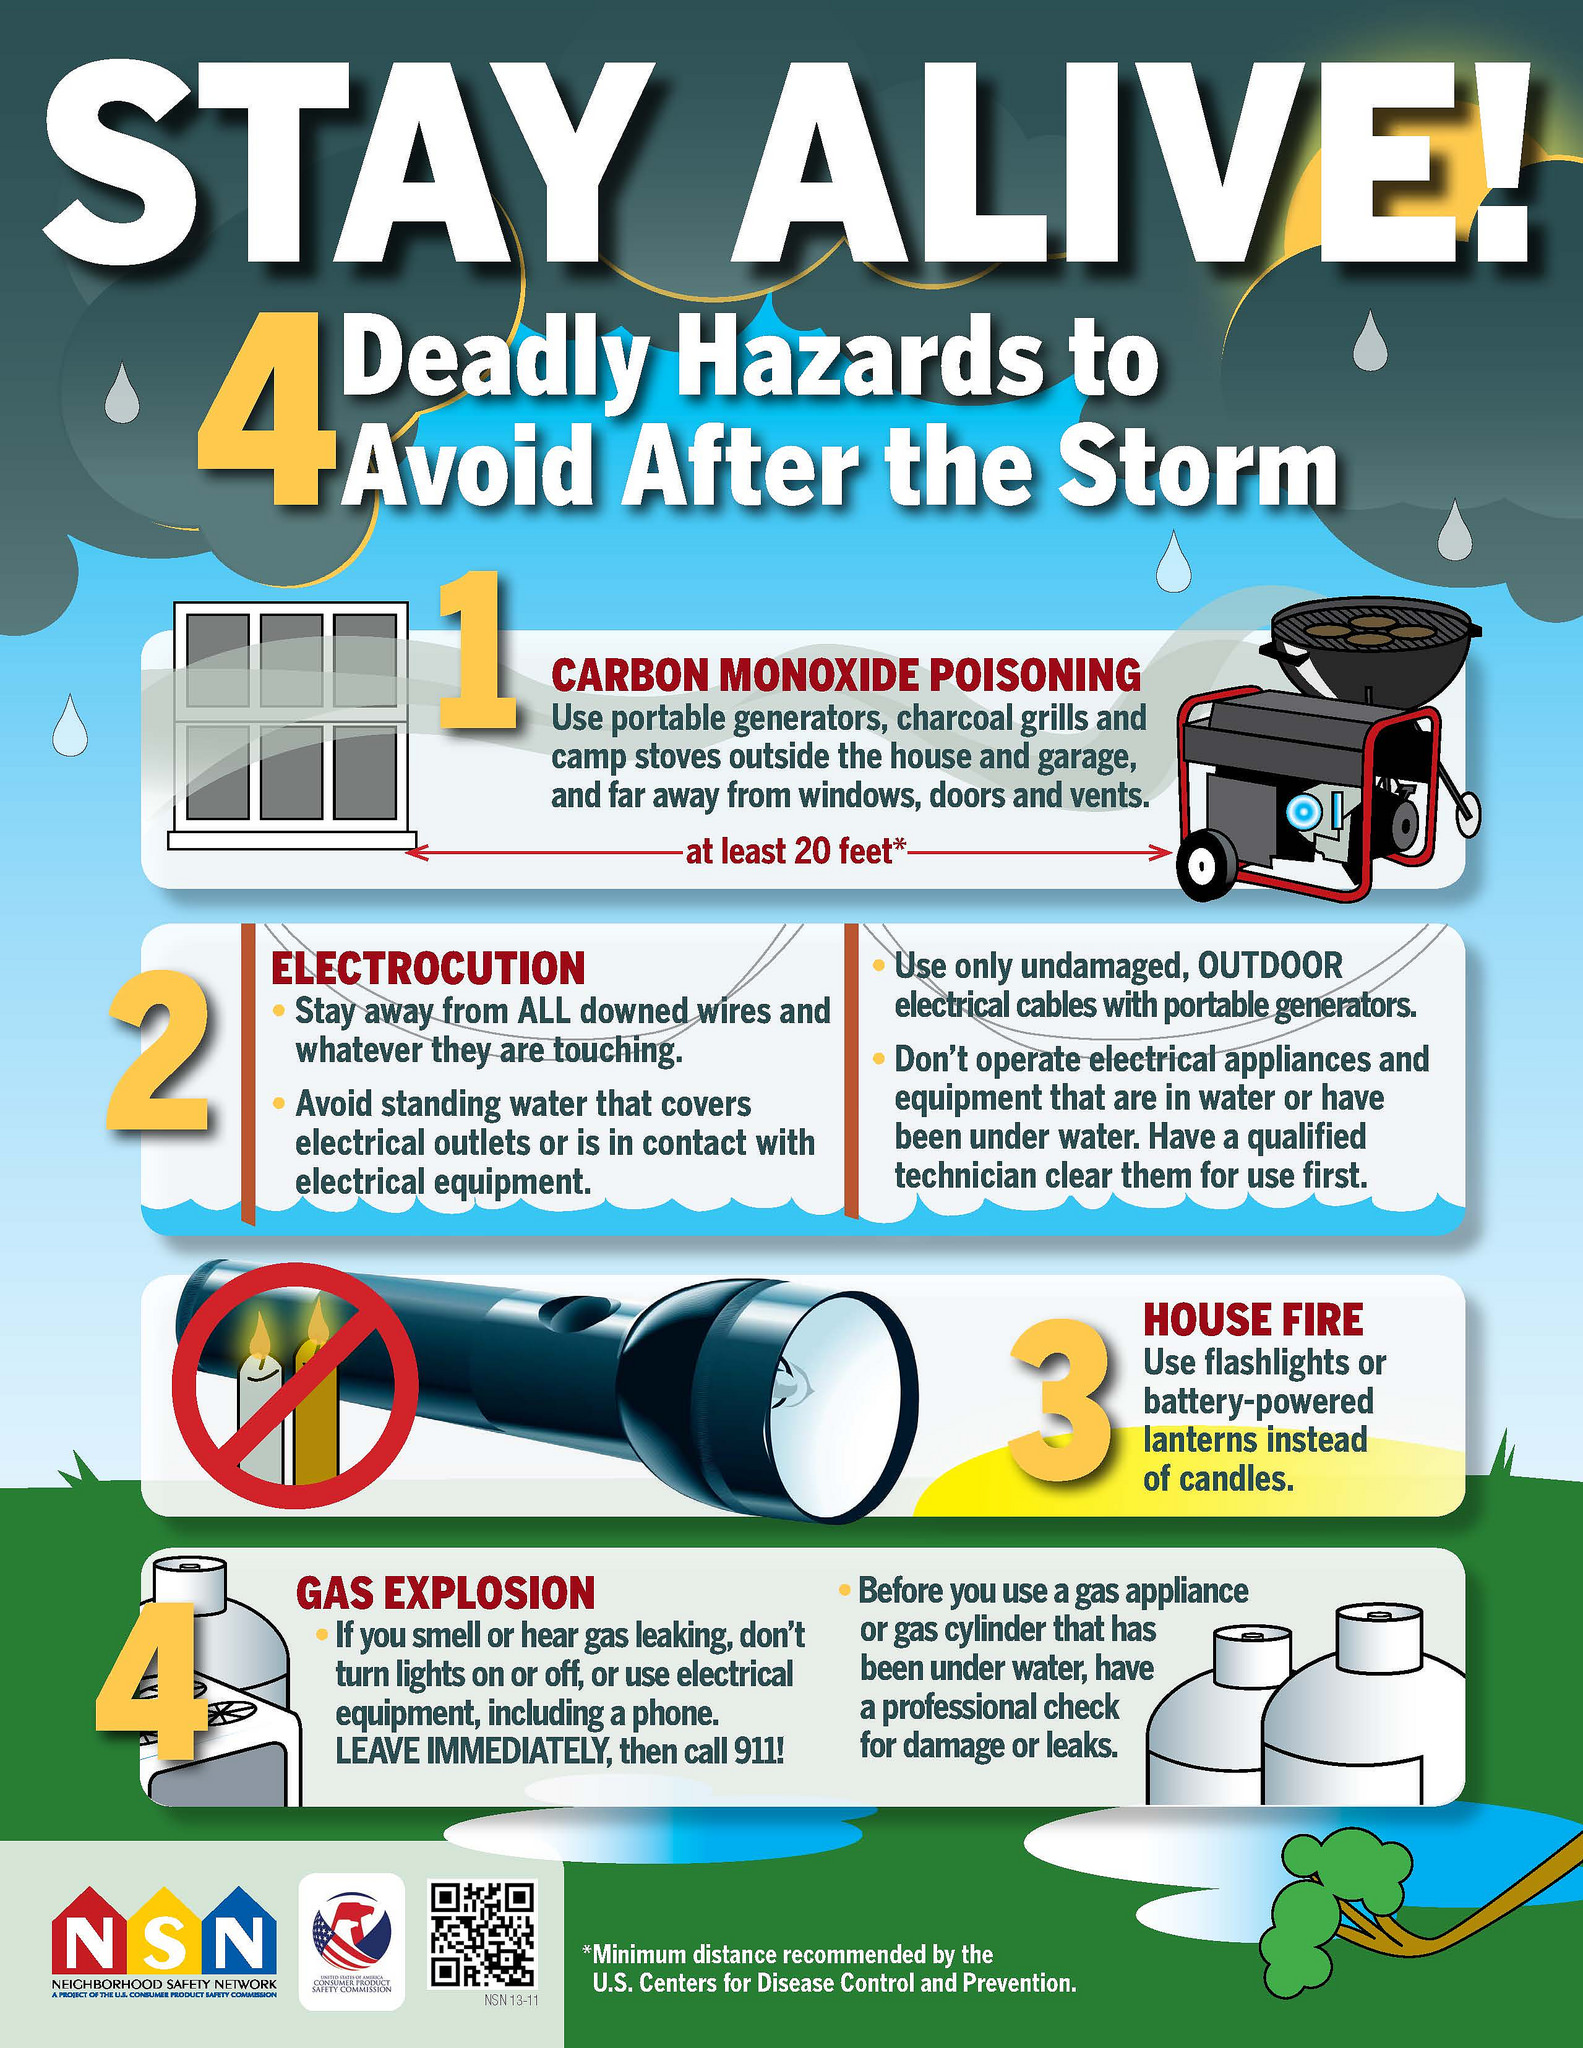 4 deadly hazards to avoid after the storm